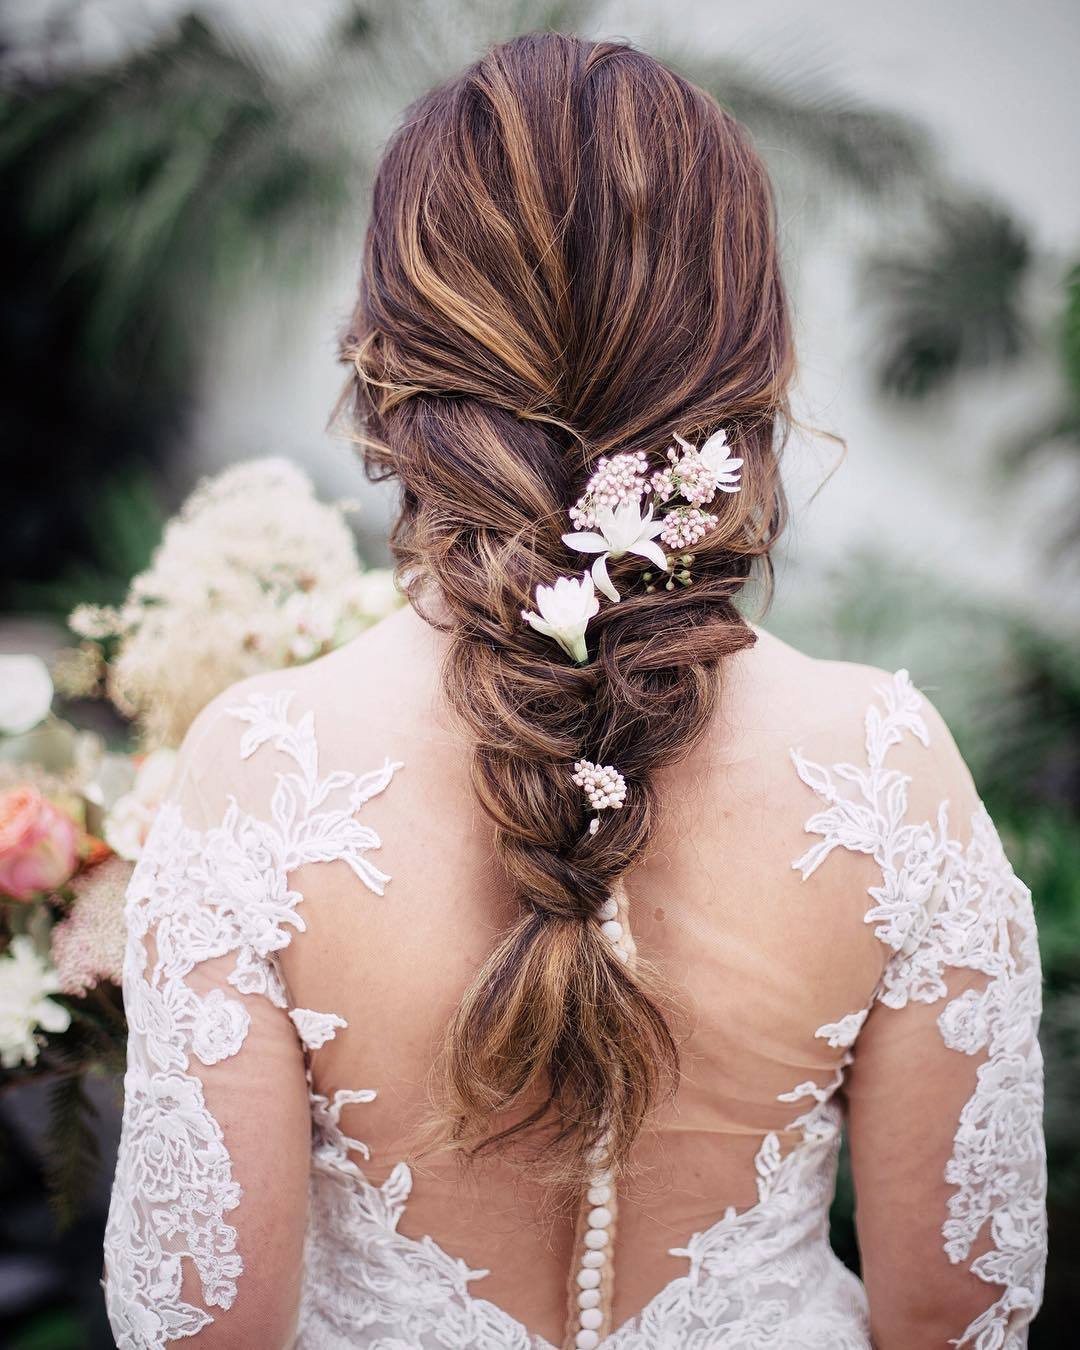 Loose Wedding Hairstyles
 47 Stunning Wedding Hairstyles All Brides Will Love